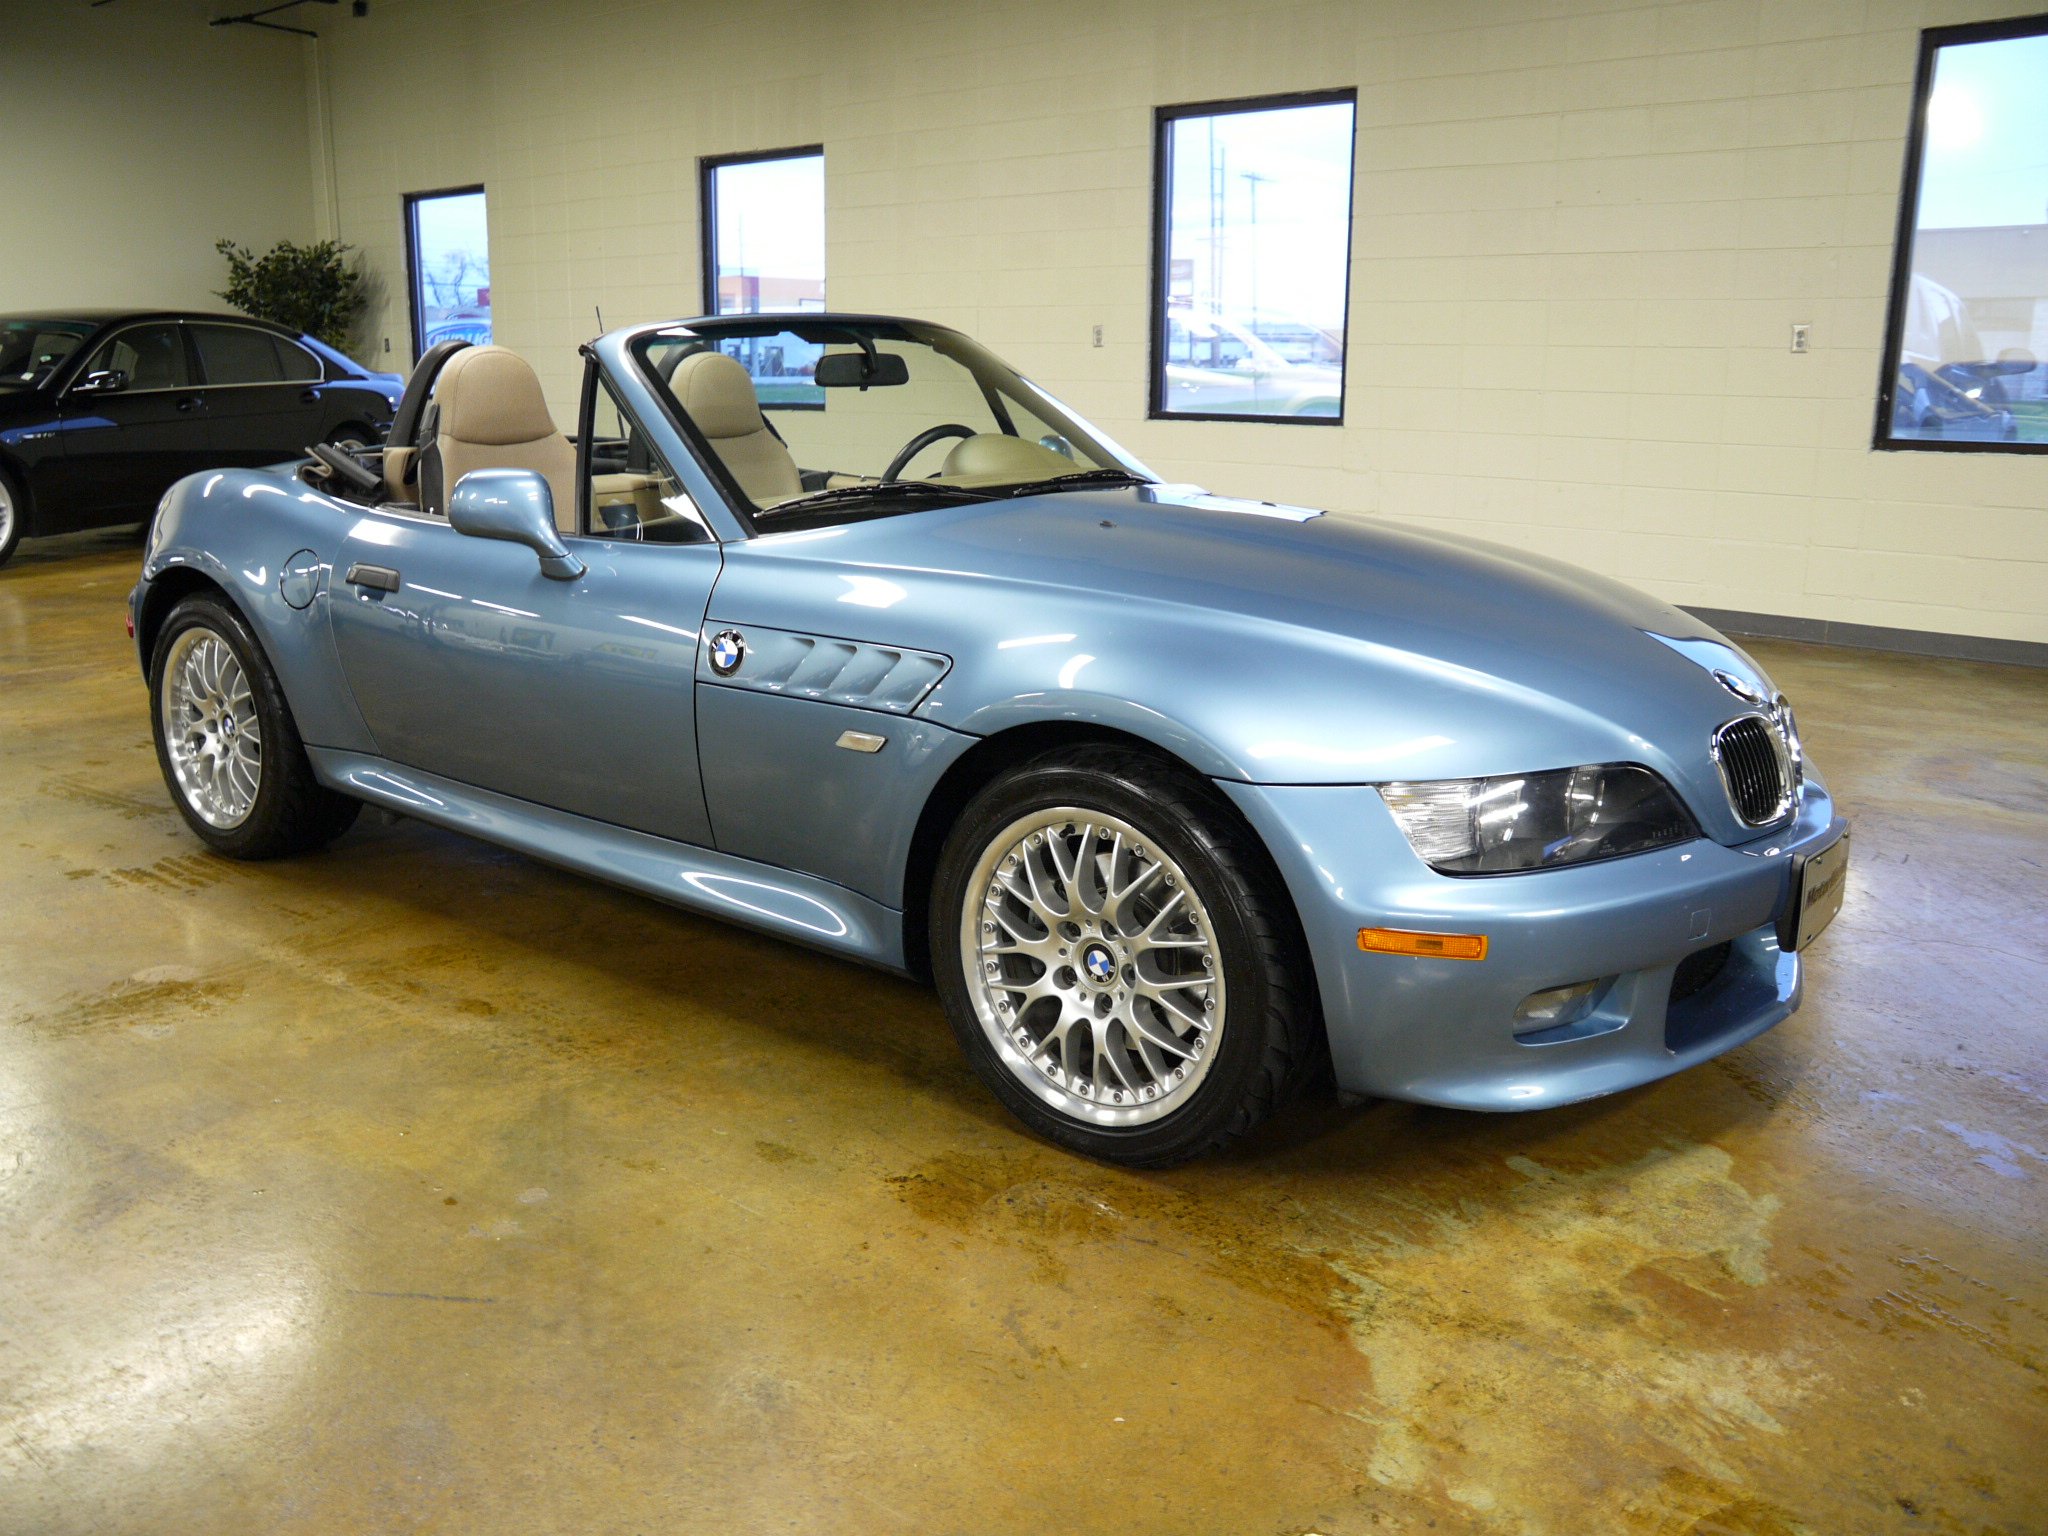 1999, Bmw m, Roadster, Cars, Convertible, Germany Wallpaper